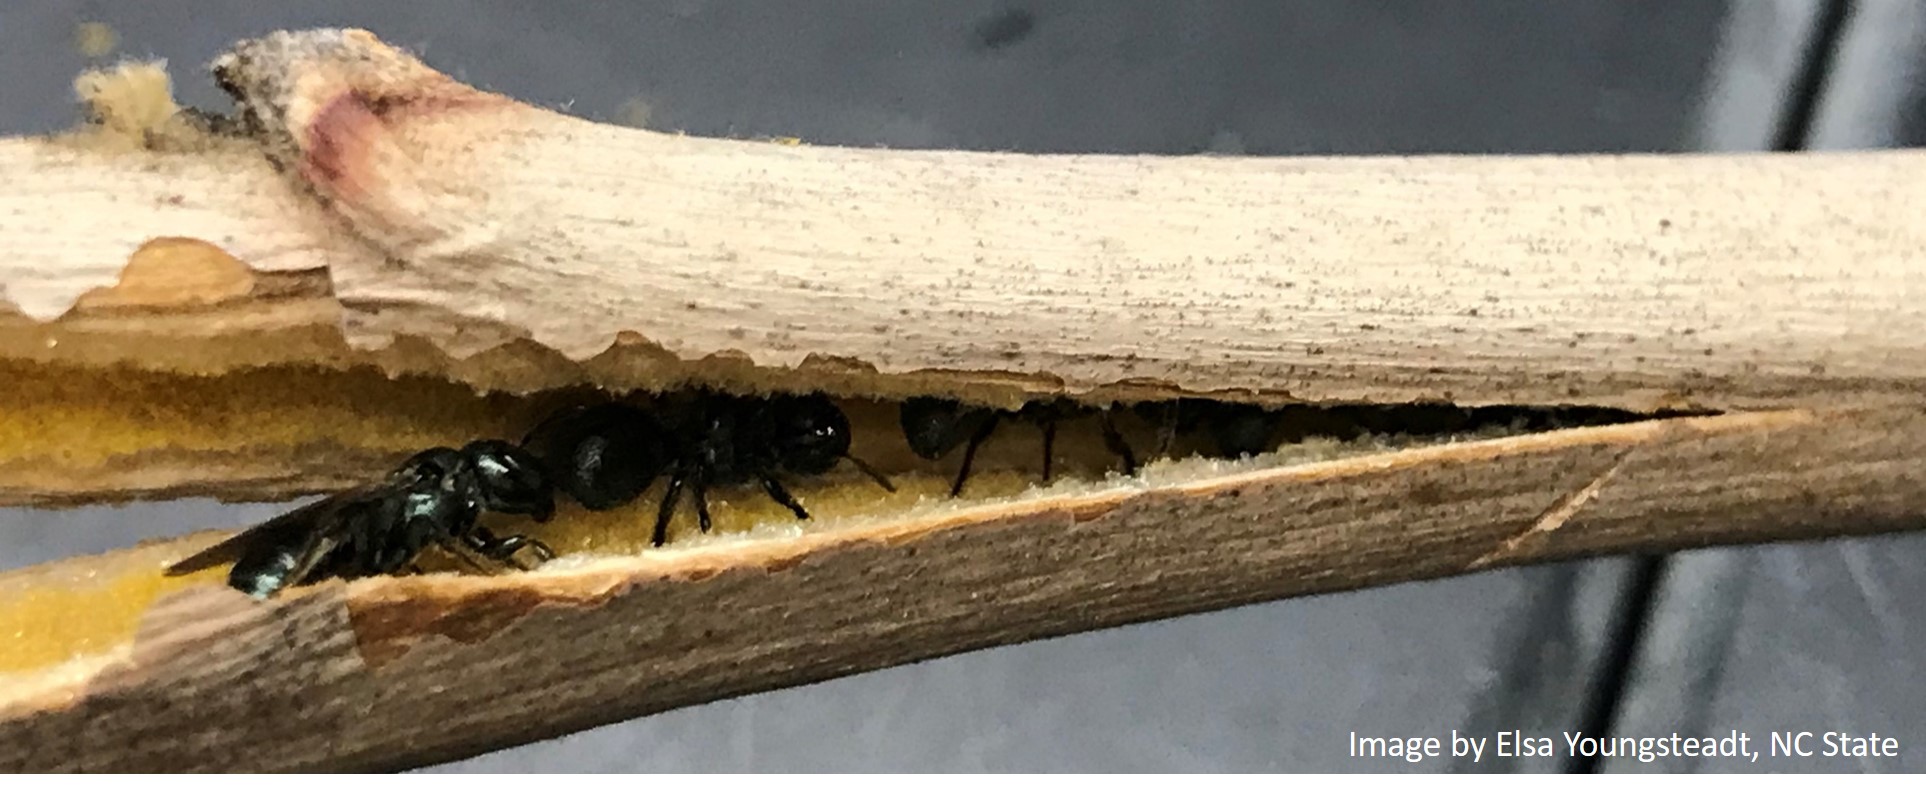 Small black bees inside of plant stem.